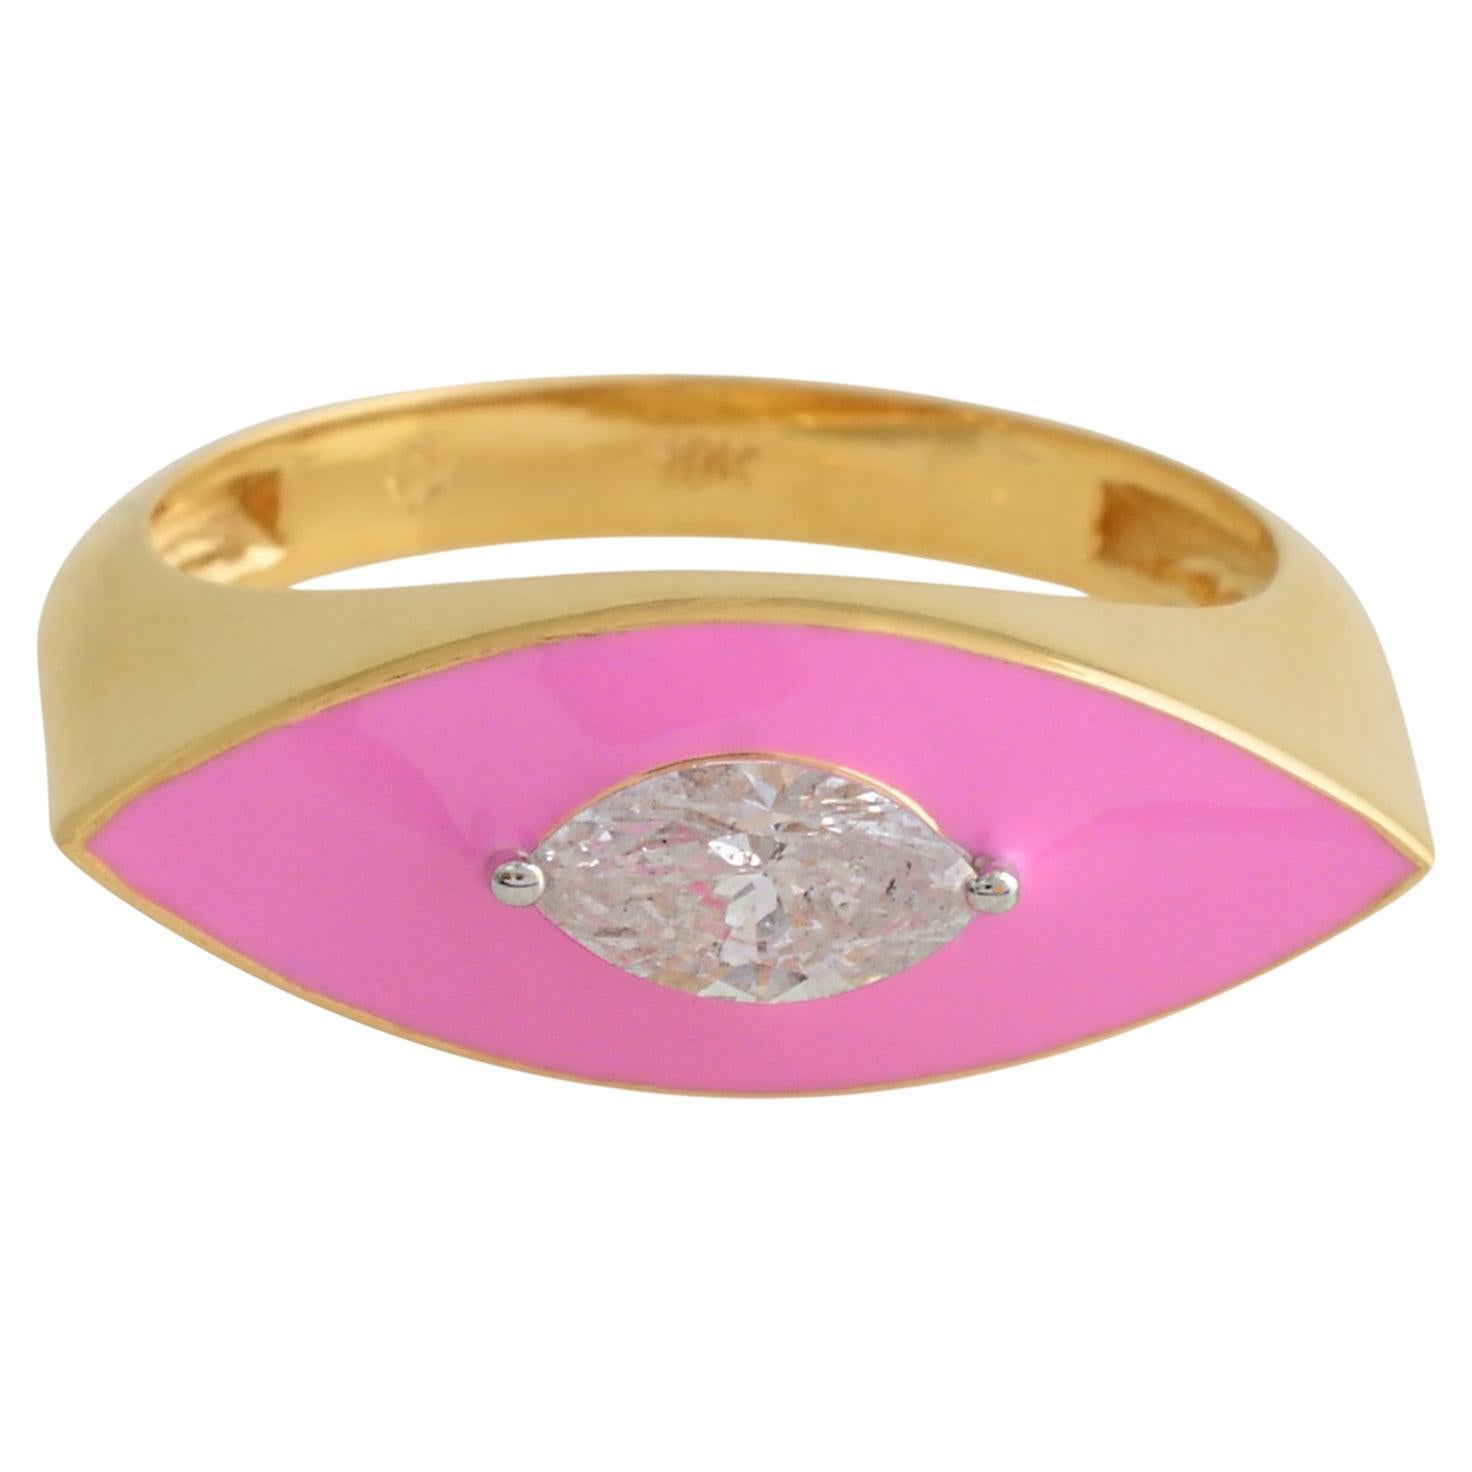 0.38 Carat Solitaire Diamond Evil Eye Ring 14k Yellow Gold Pink Enamel Jewelry For Sale